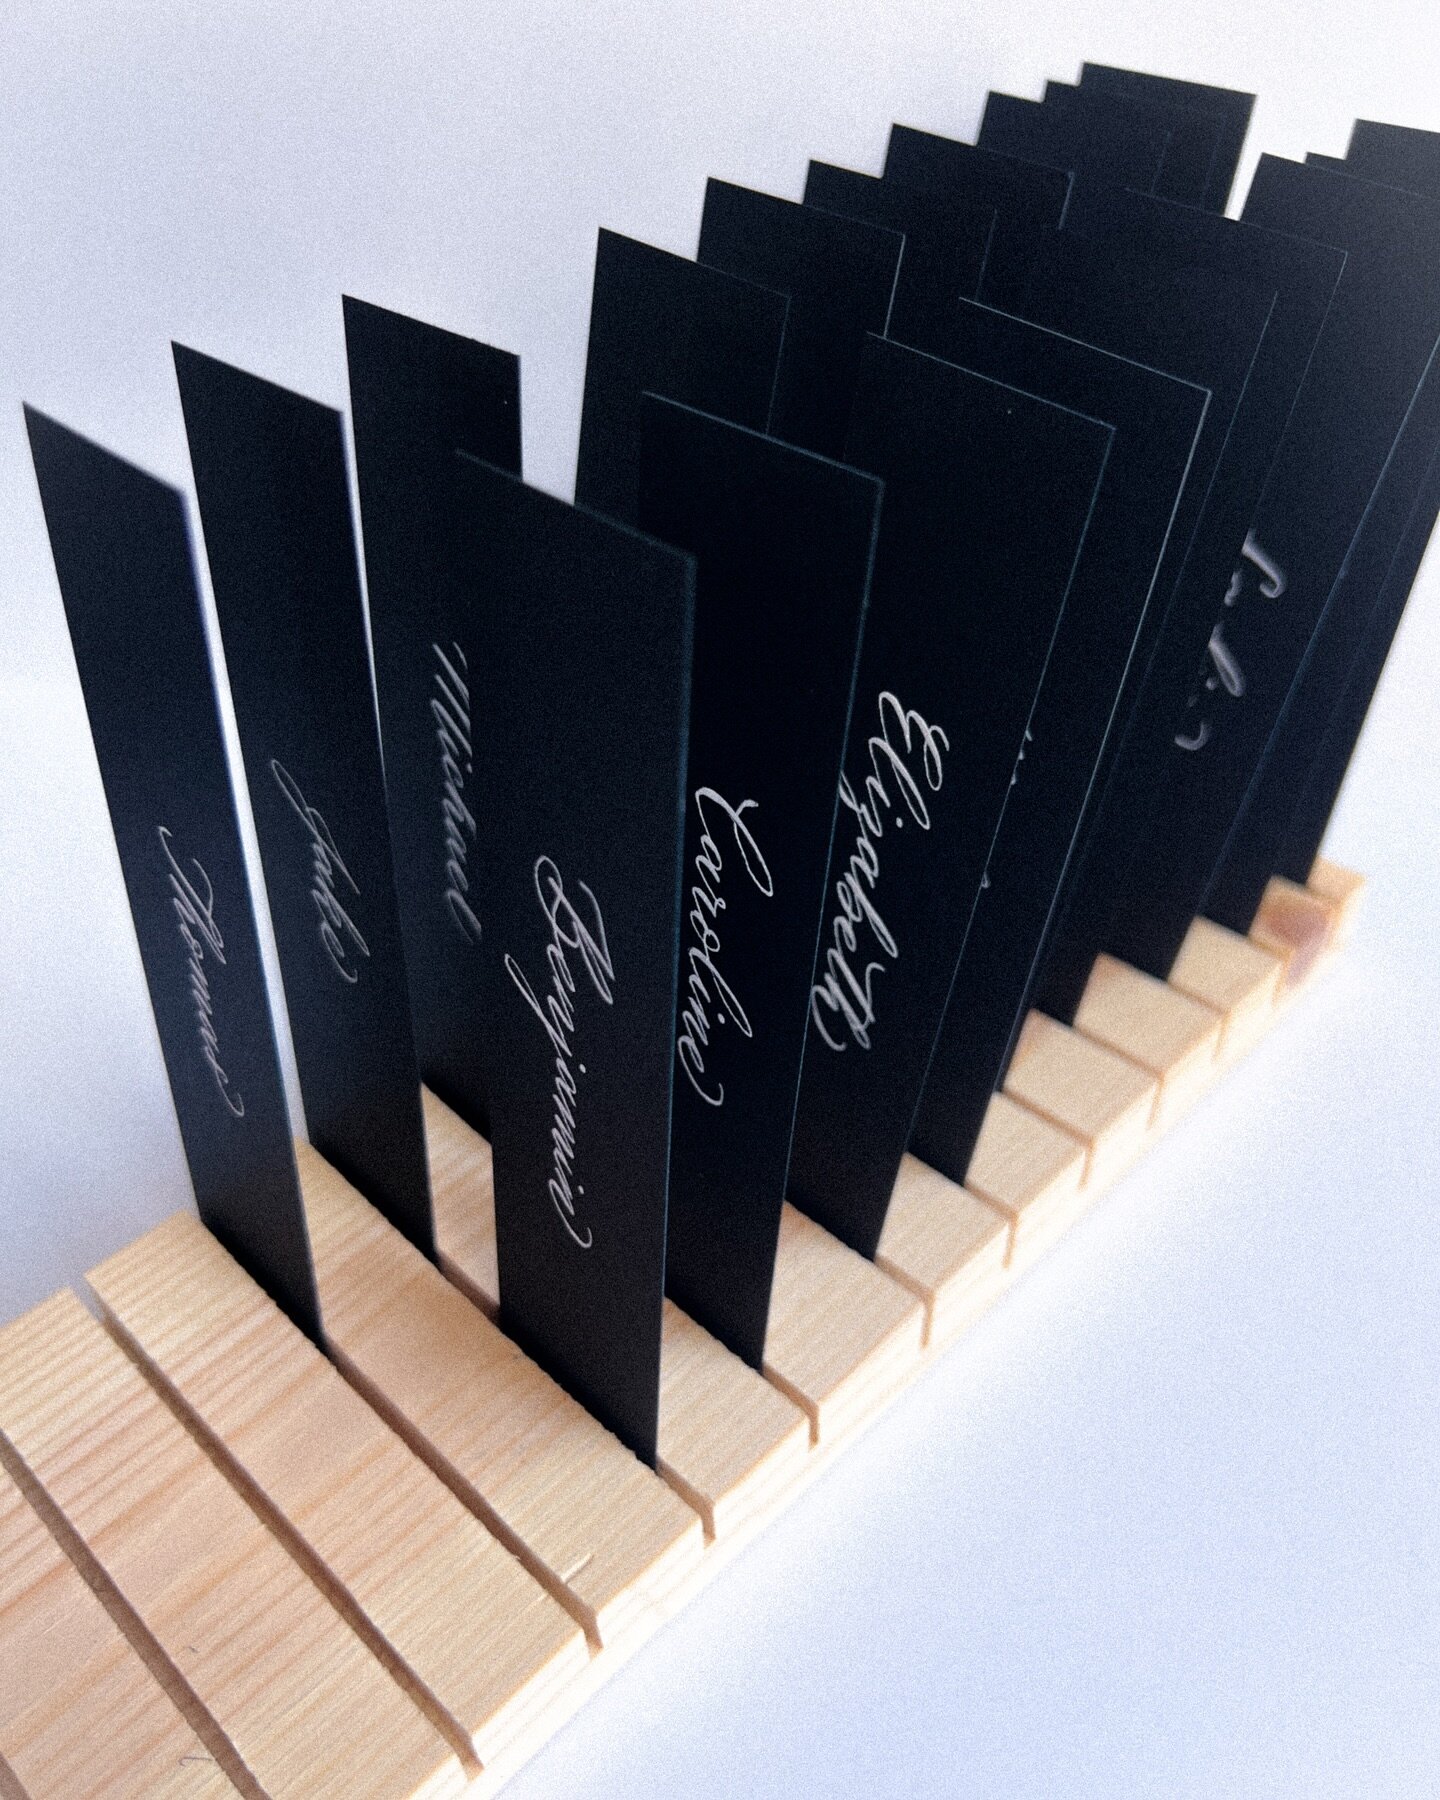 Two reasons why place cards are a must for your next event: 

1) They add a touch of sophistication, ensuring every guest feels special and valued. 

2) They streamline seating arrangements, making transitions smoother and allowing everyone to enjoy 